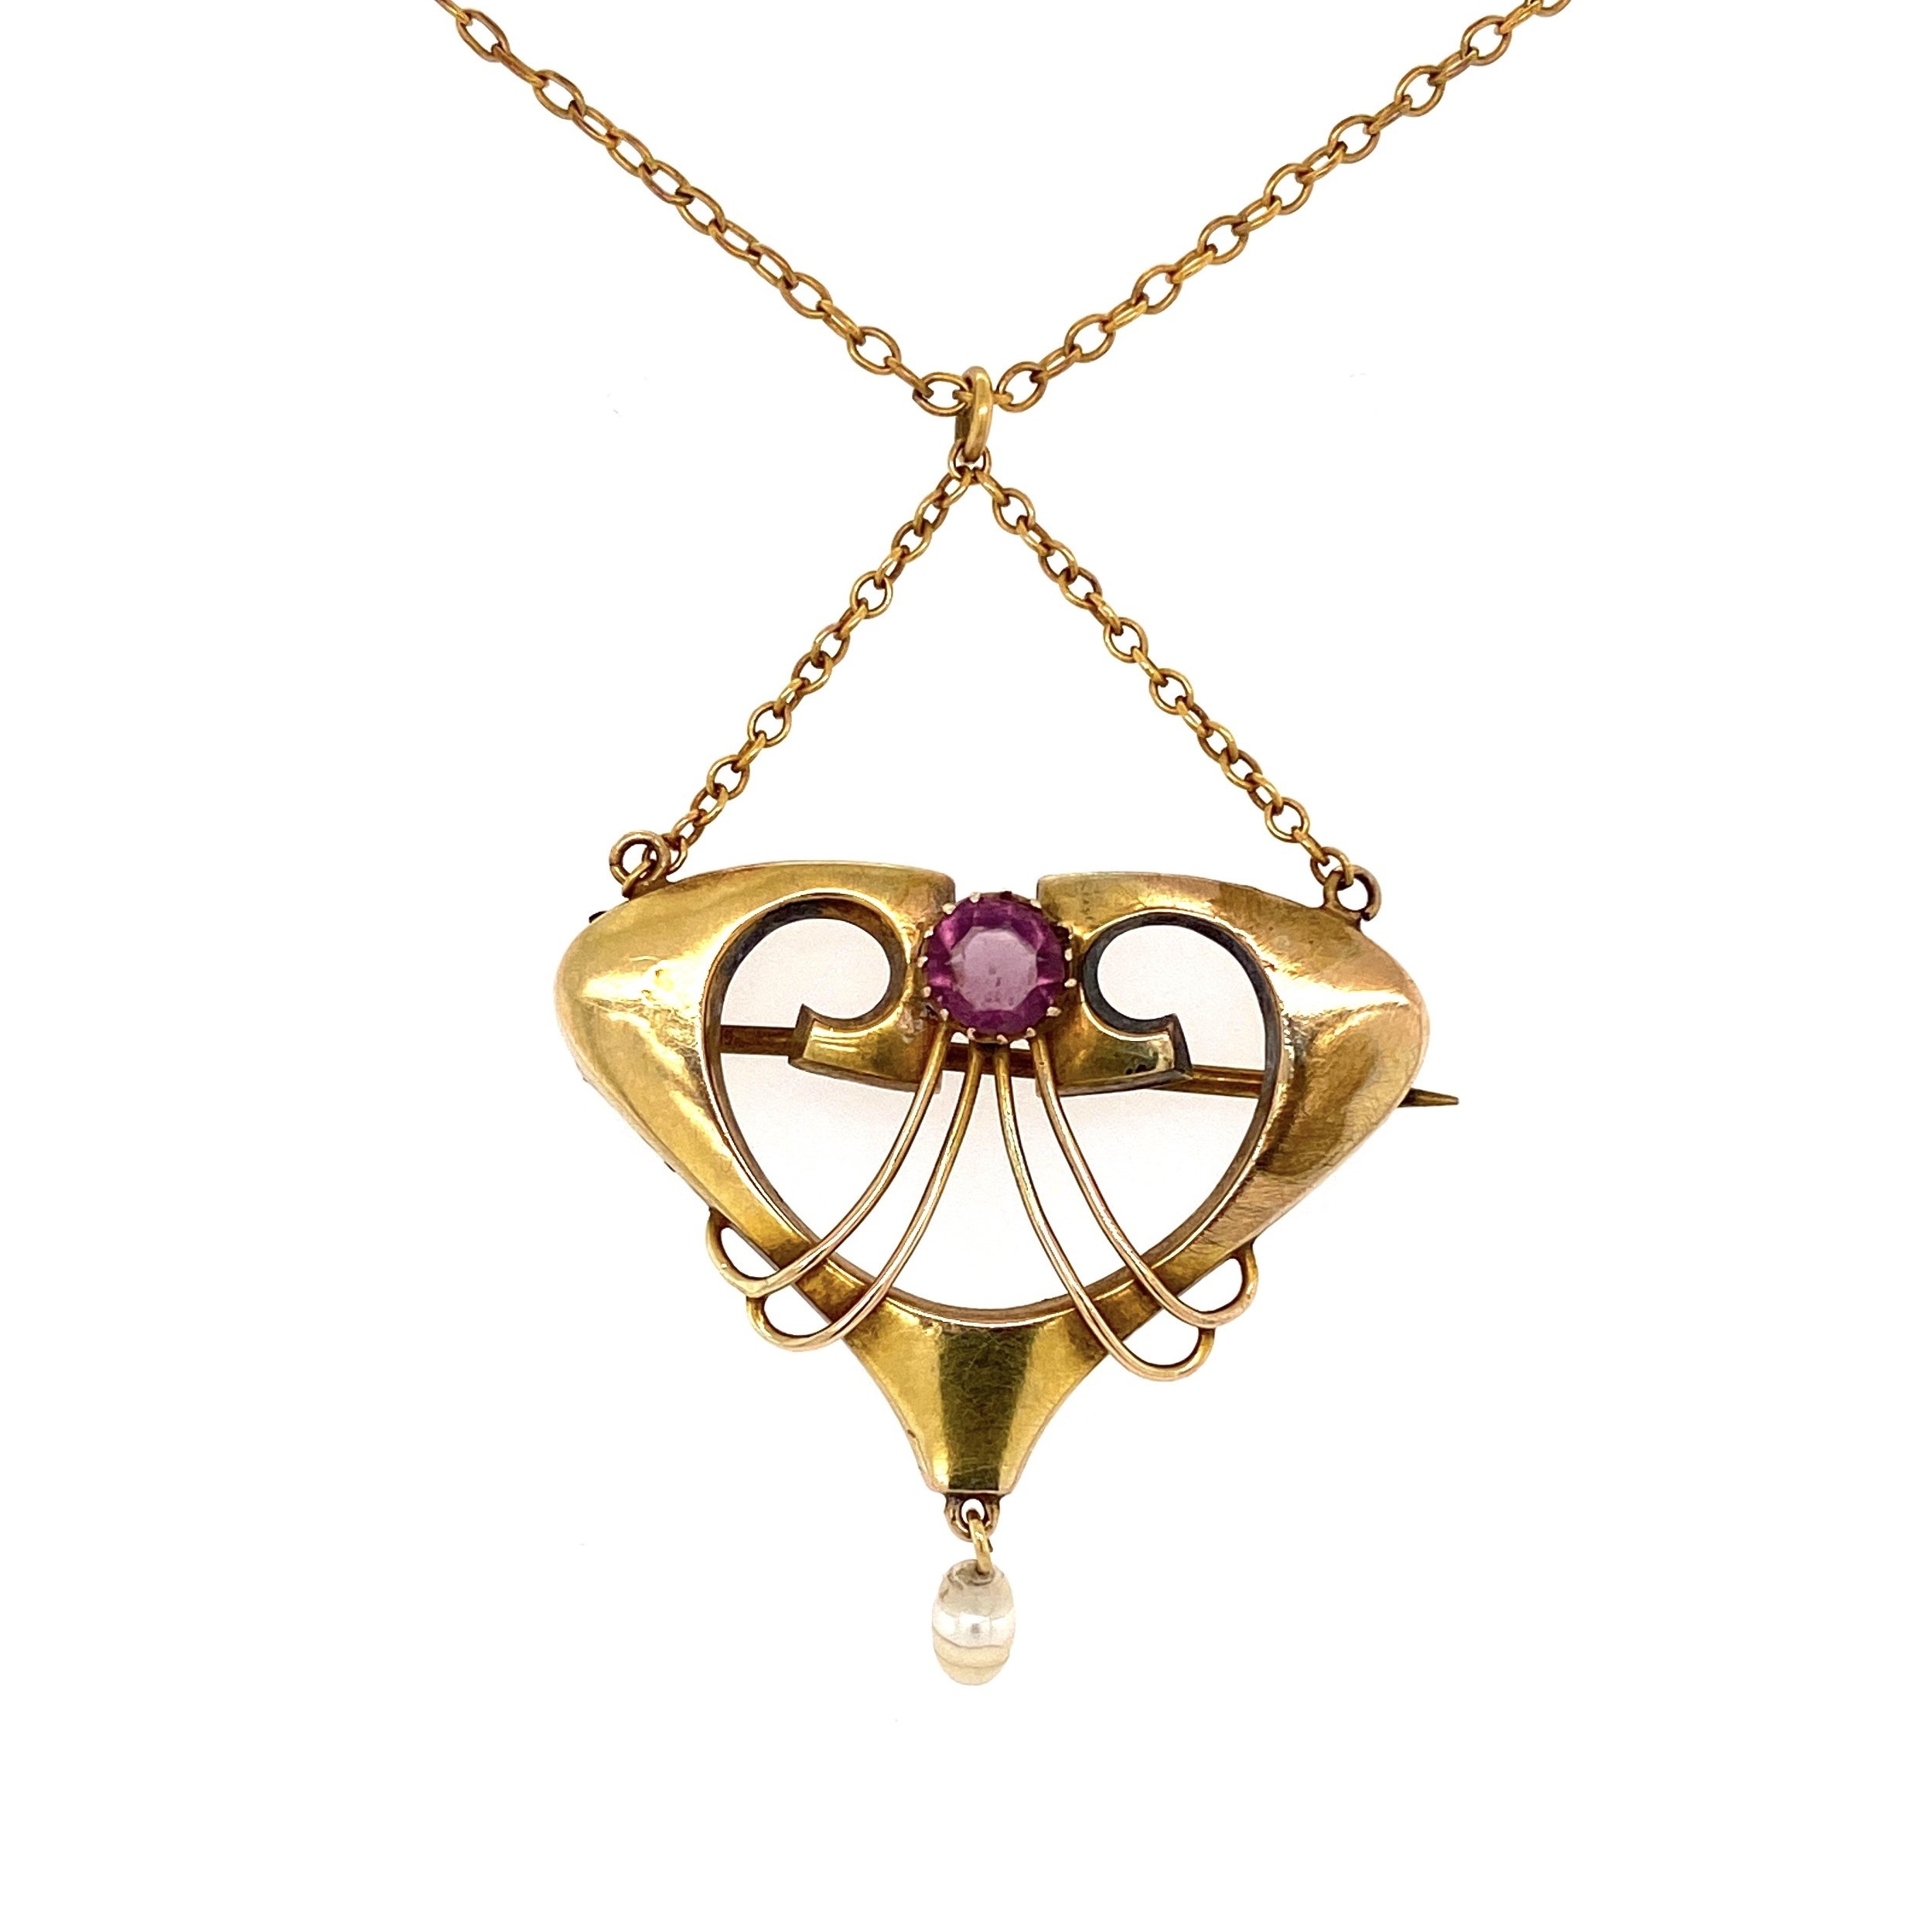 Art Nouveau Yellow Gold Necklace with Amethyst & Pearl 3.3g, 18"